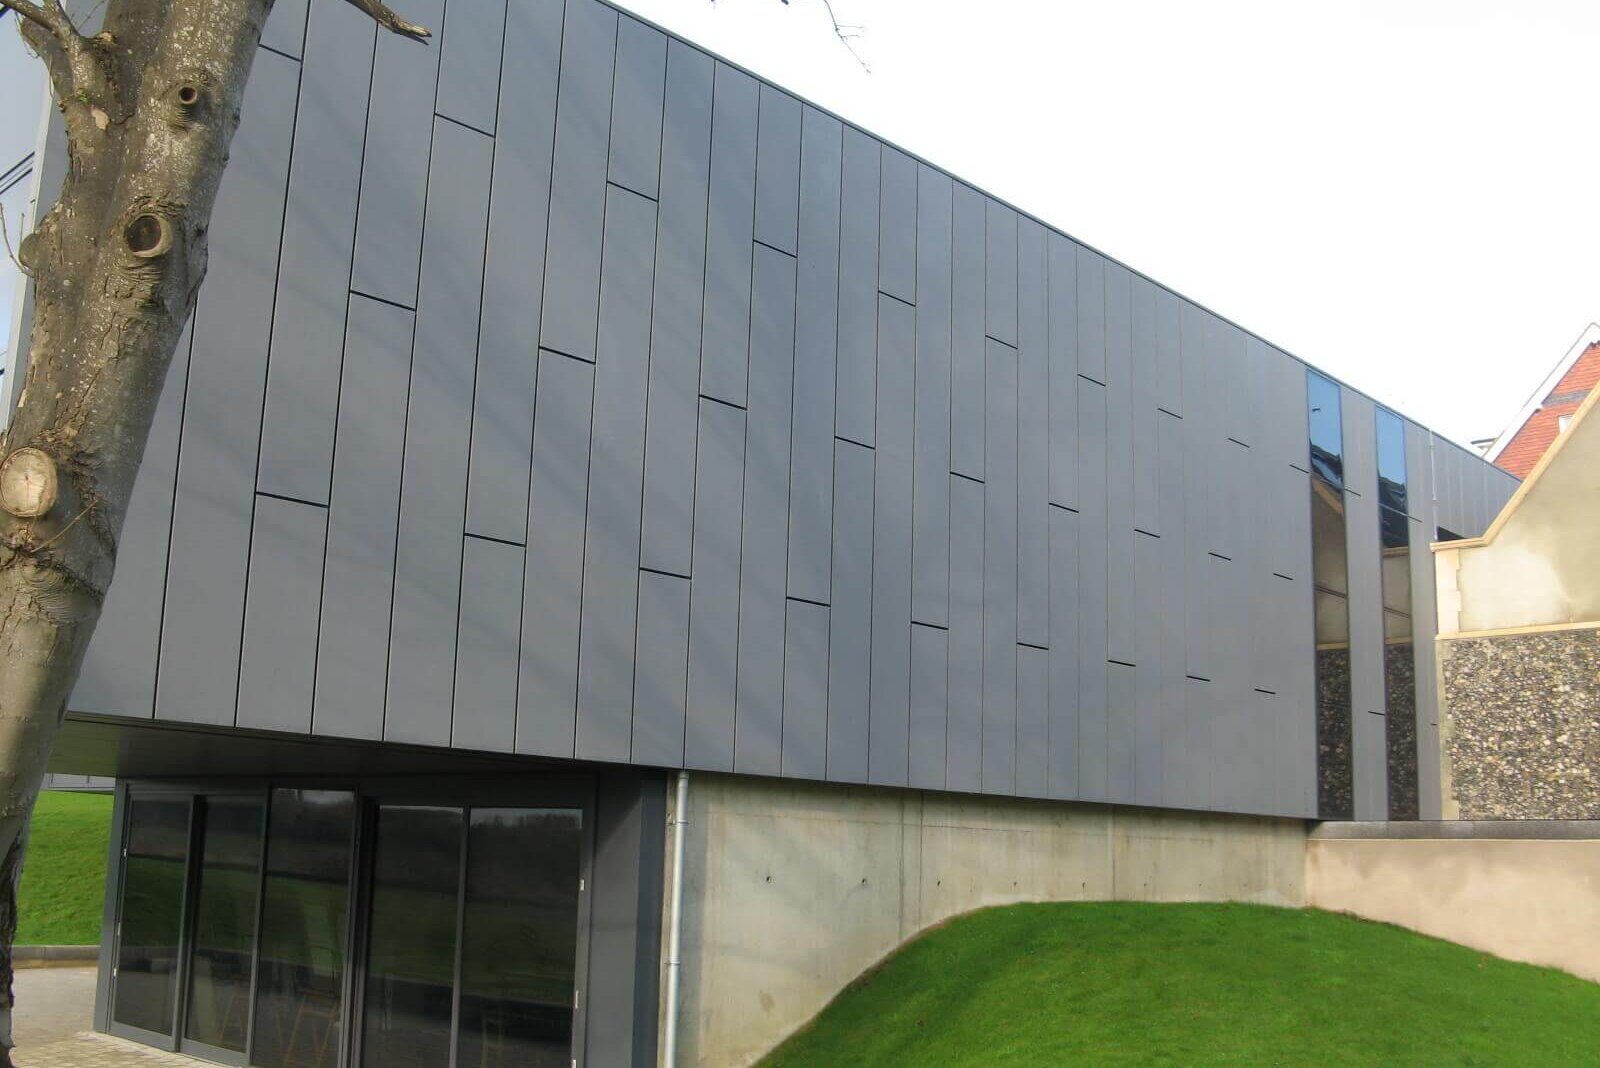 Rainscreen system at Lancing College